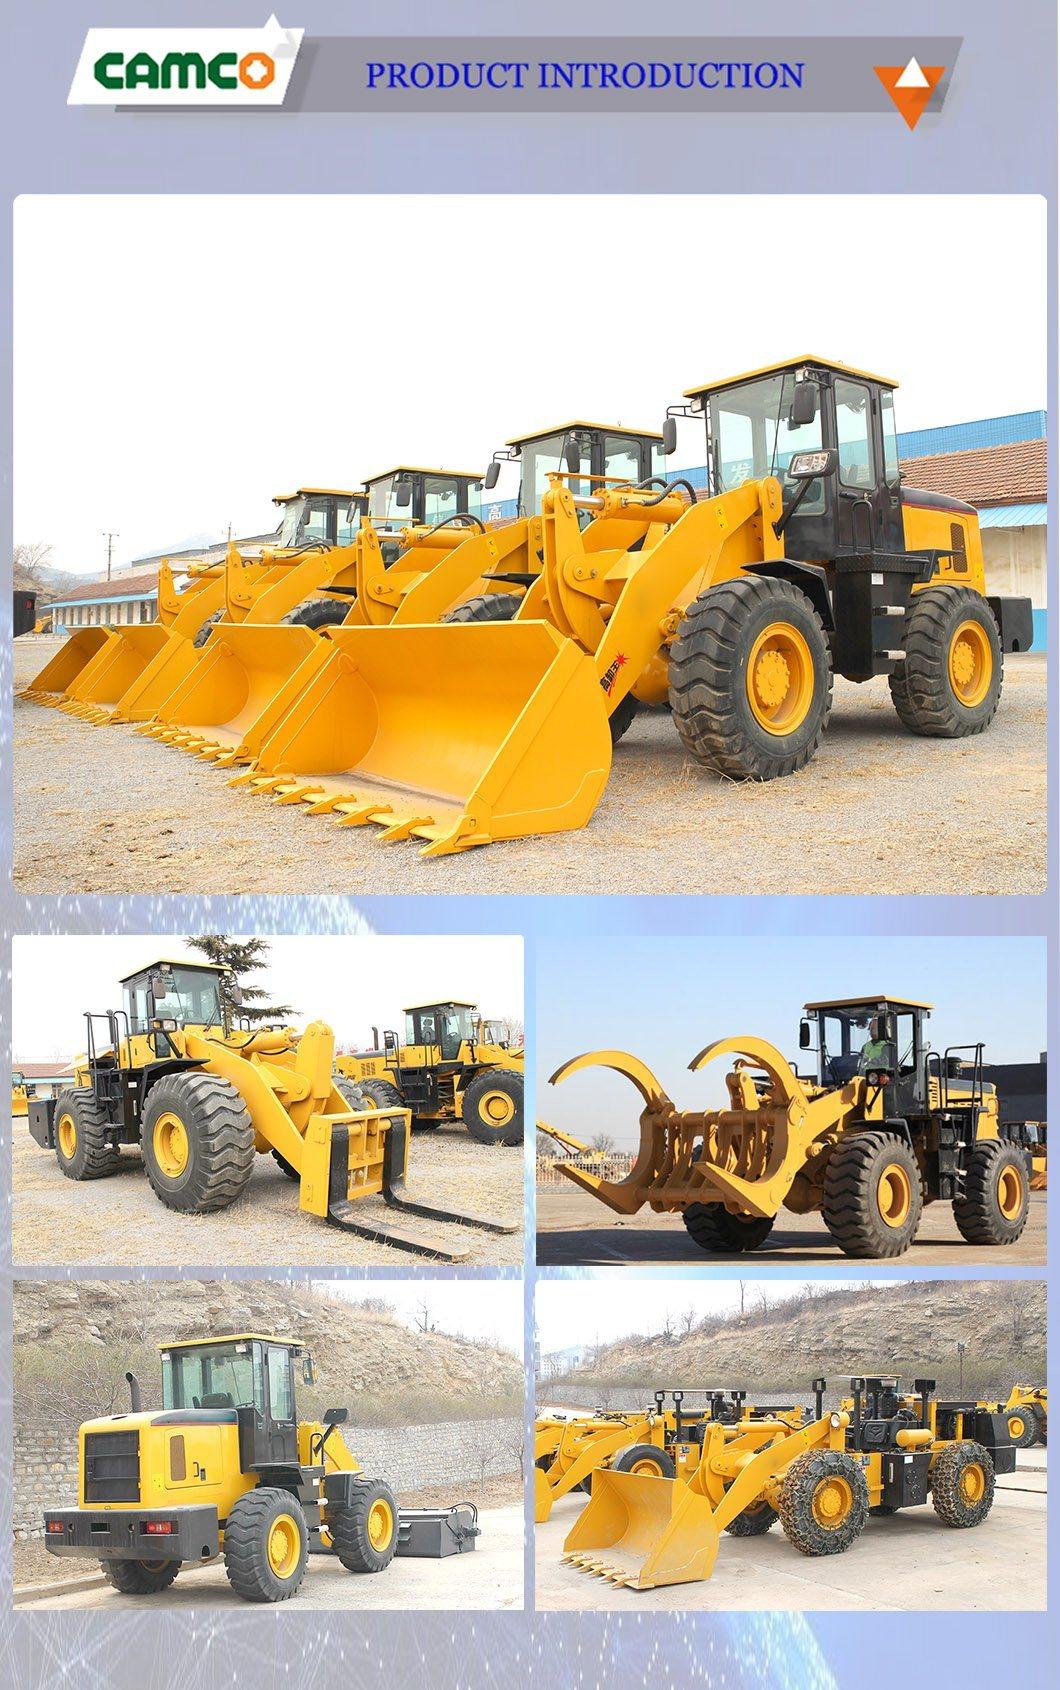 Heavy Duty Earthmoving Machinery Zl30 Zl50 Zl60 Big Wheel Loading Equipment Diesel Engine Equipment Industrial Compact Loader Equipment for Construction